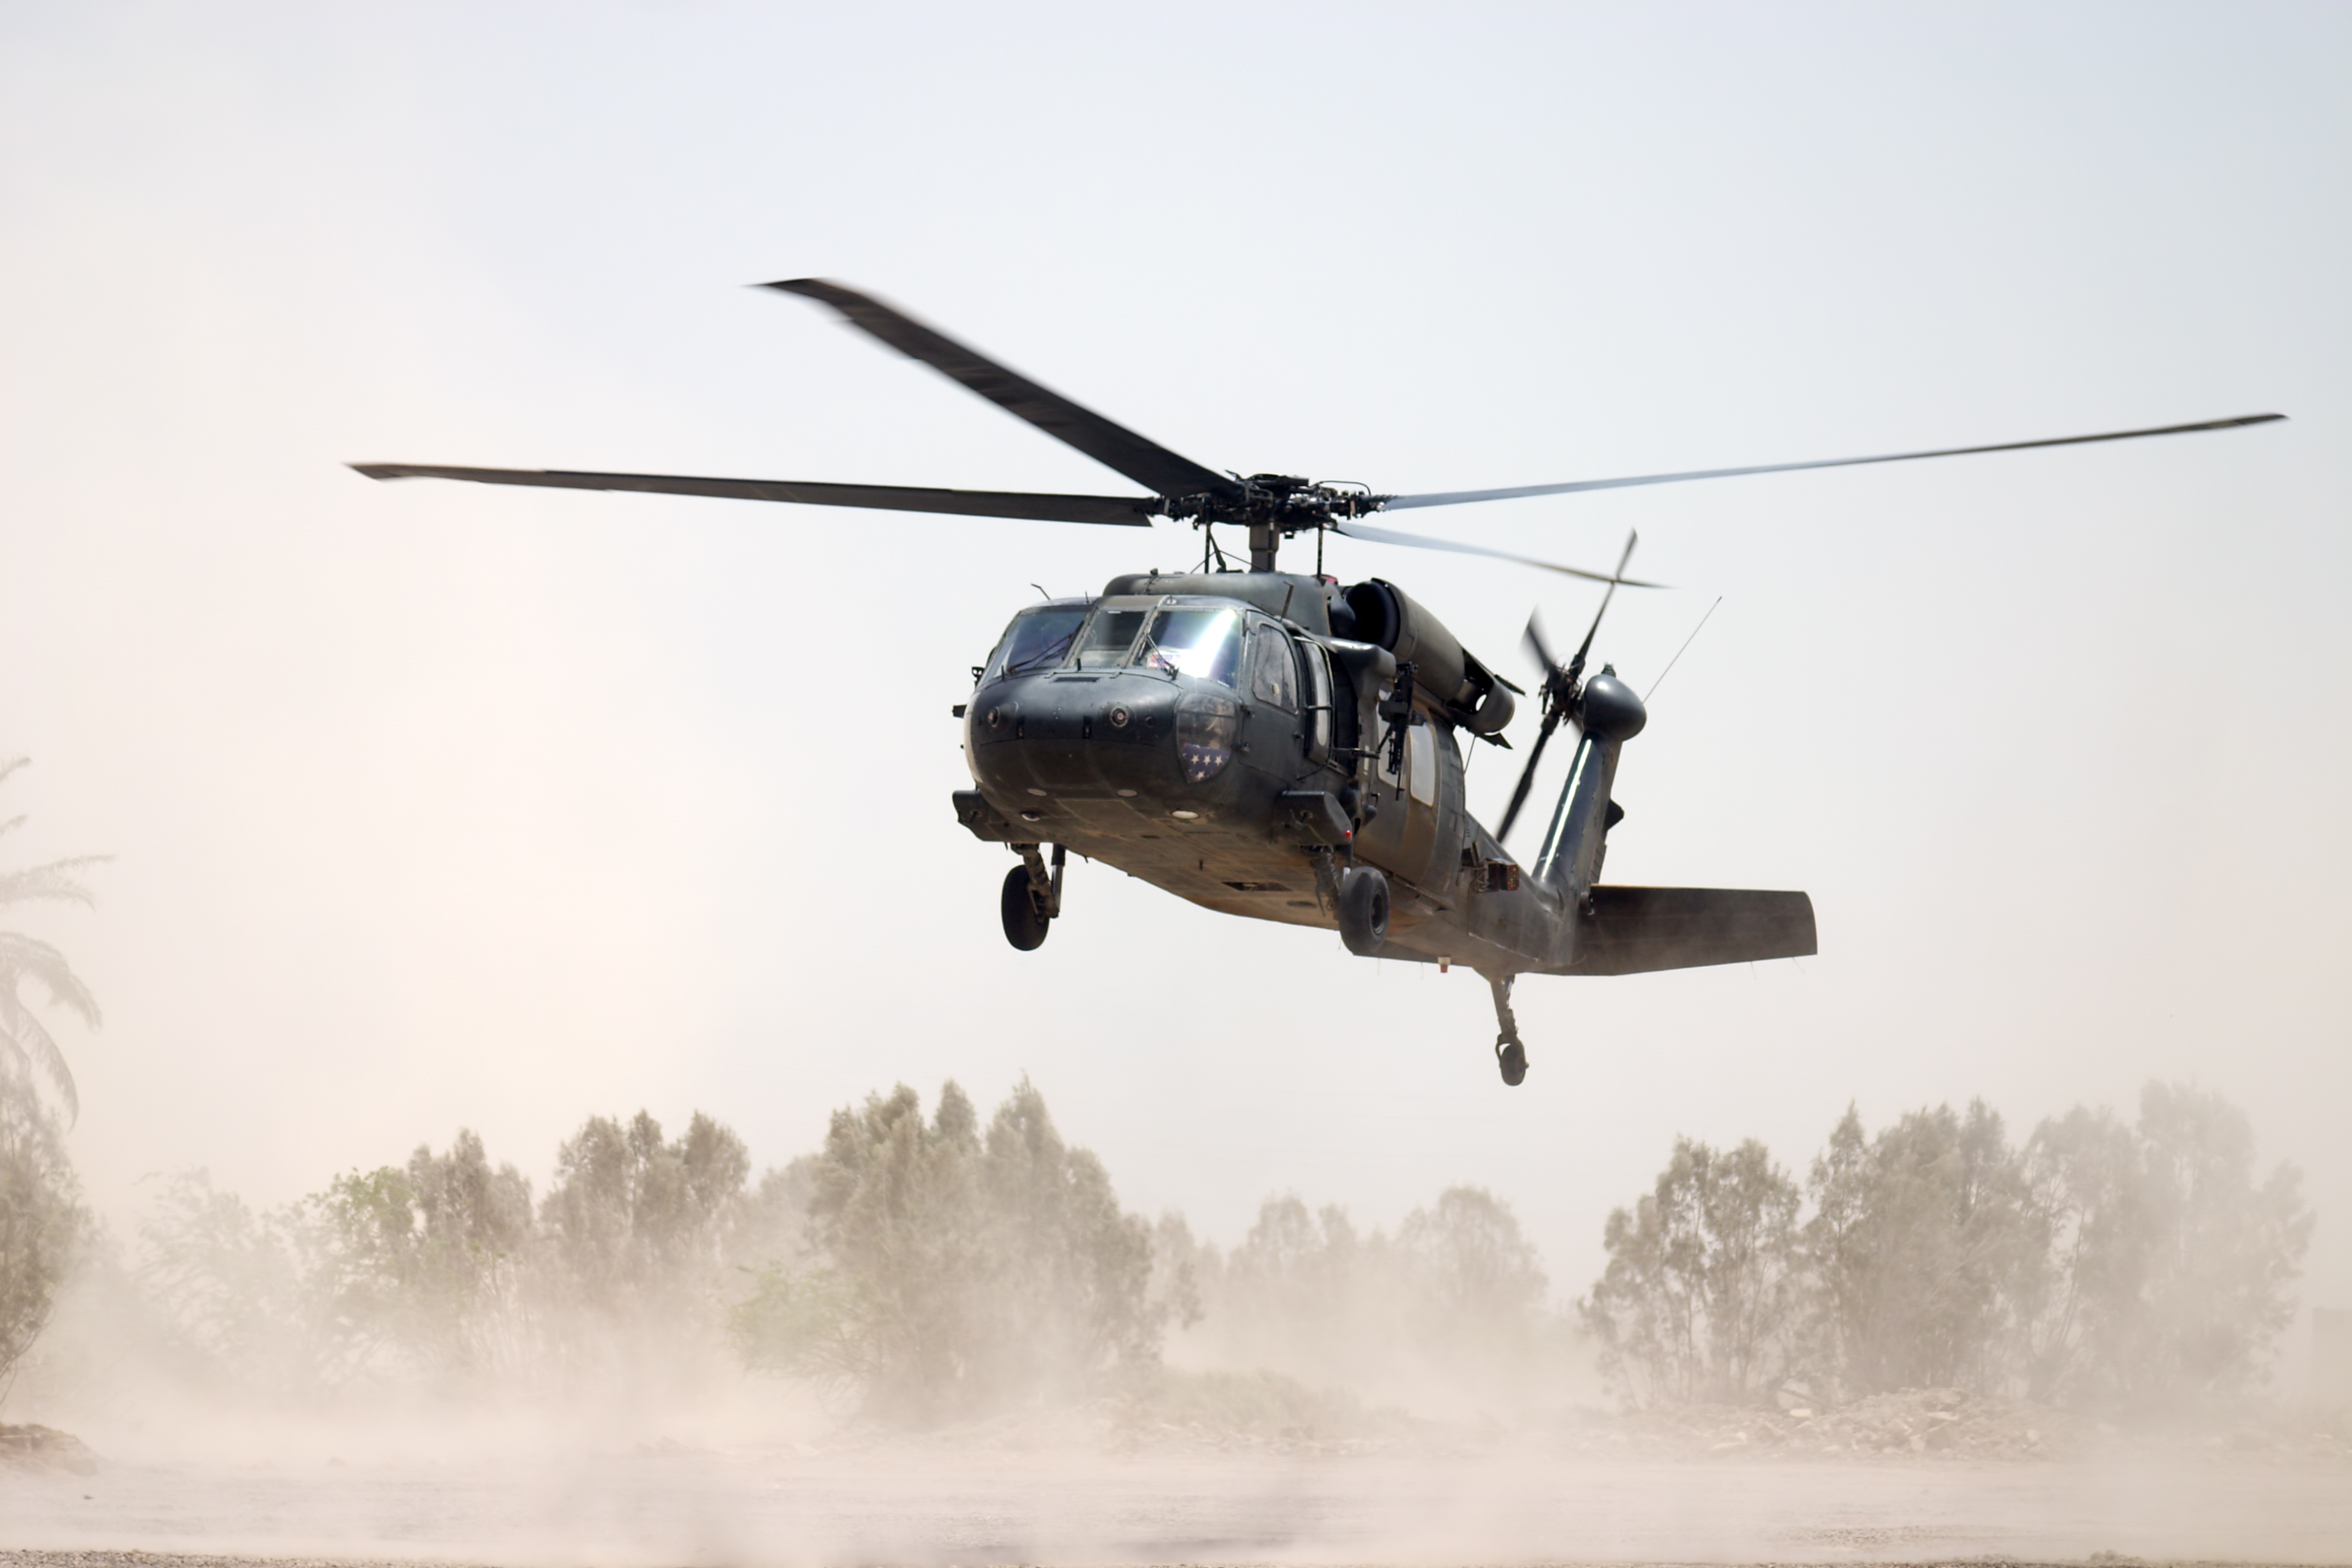 History Of The Black Hawk Helicopter